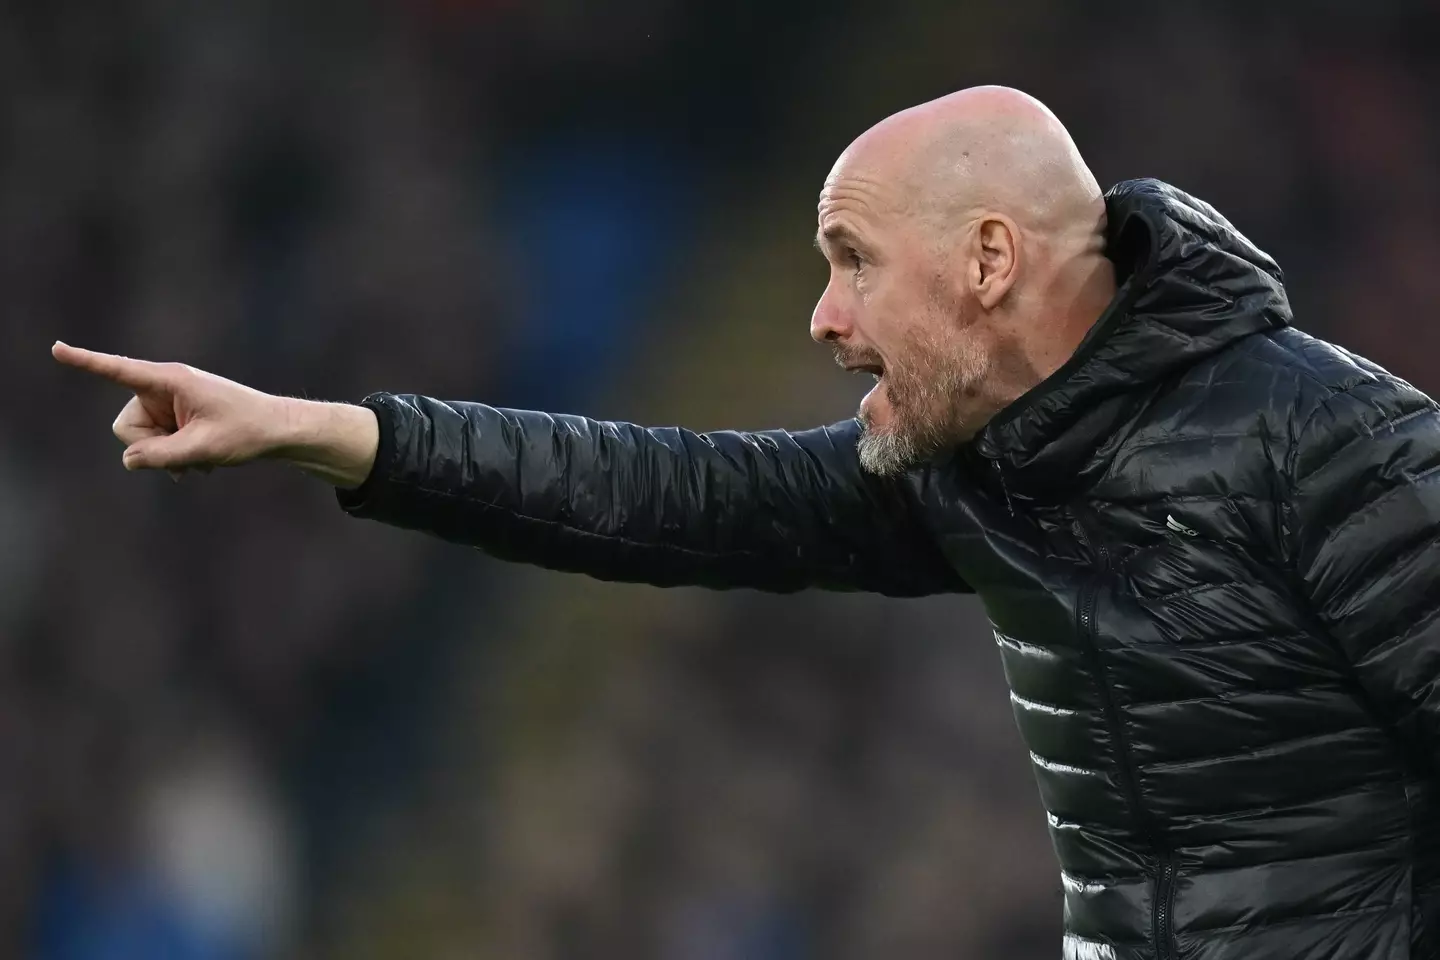 Erik ten Hag gestures on the touchline against Crystal Palace. Image: Getty